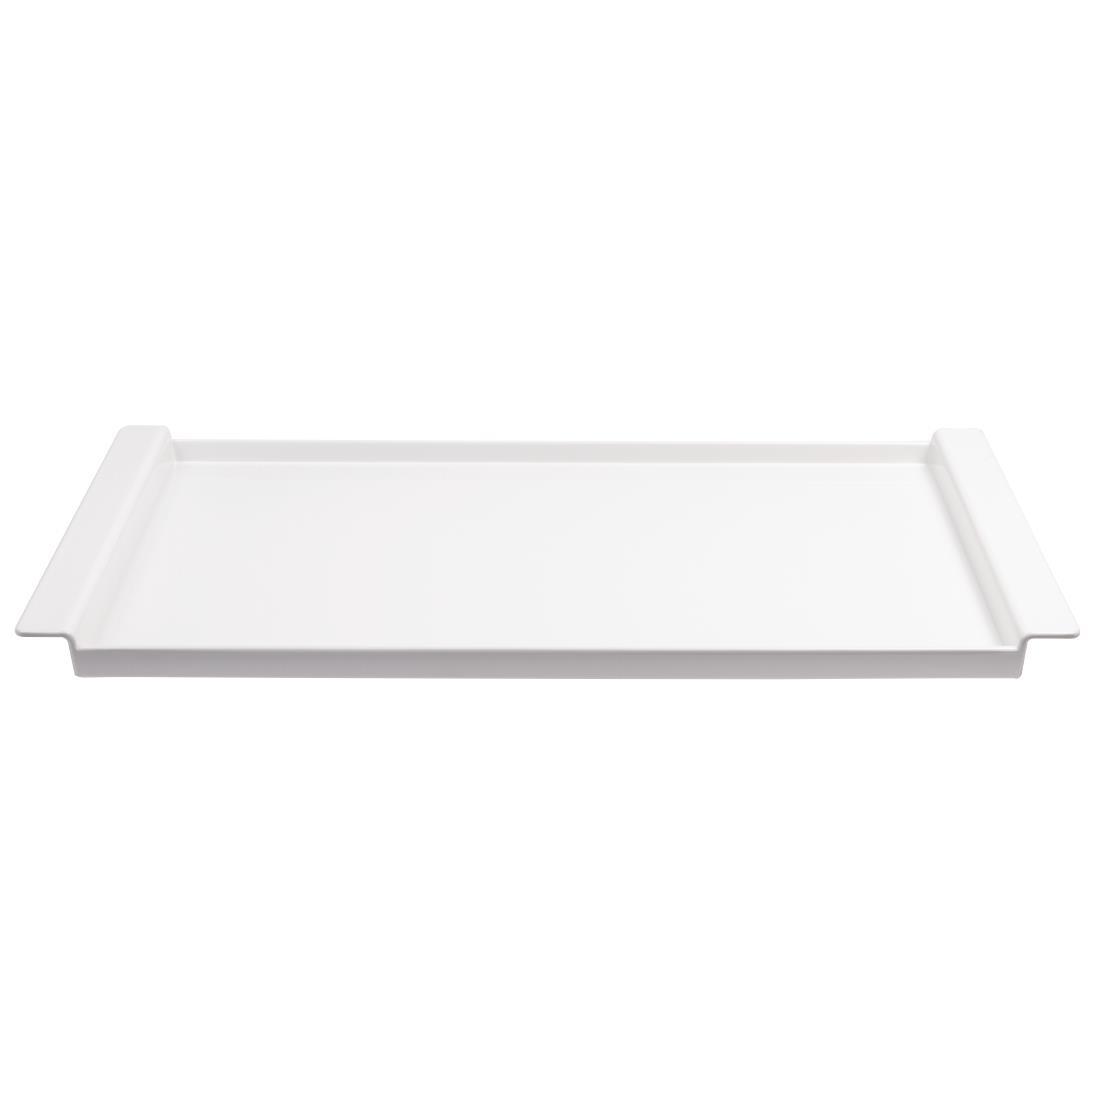 APS Breadstation Tray - GH393  - 1